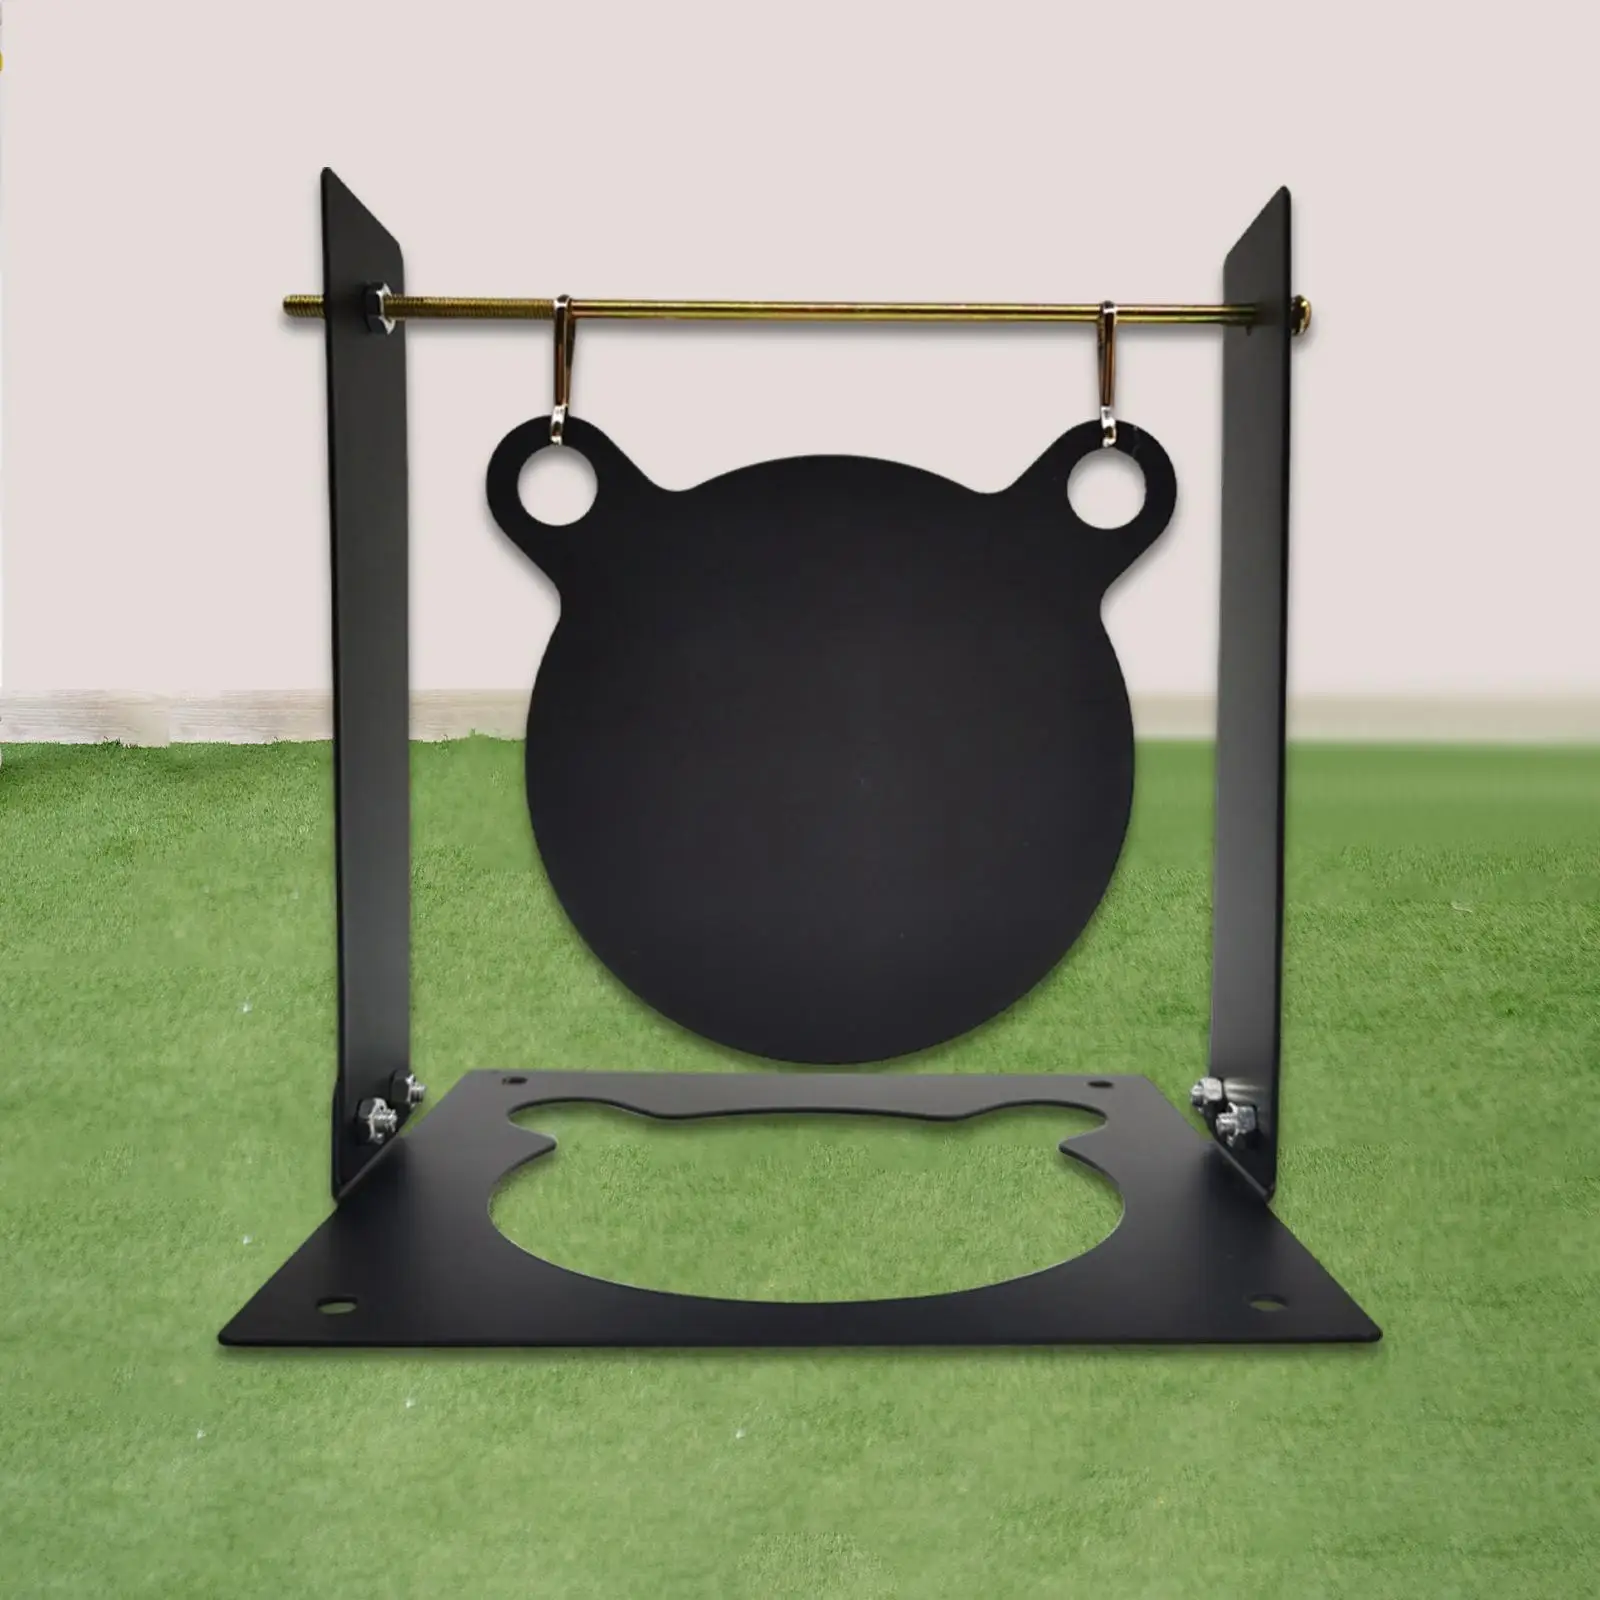 Portable Trainer Target Outdoor Sports Toy Target Hunting Training Target for Kids Boys Teens Adults Children